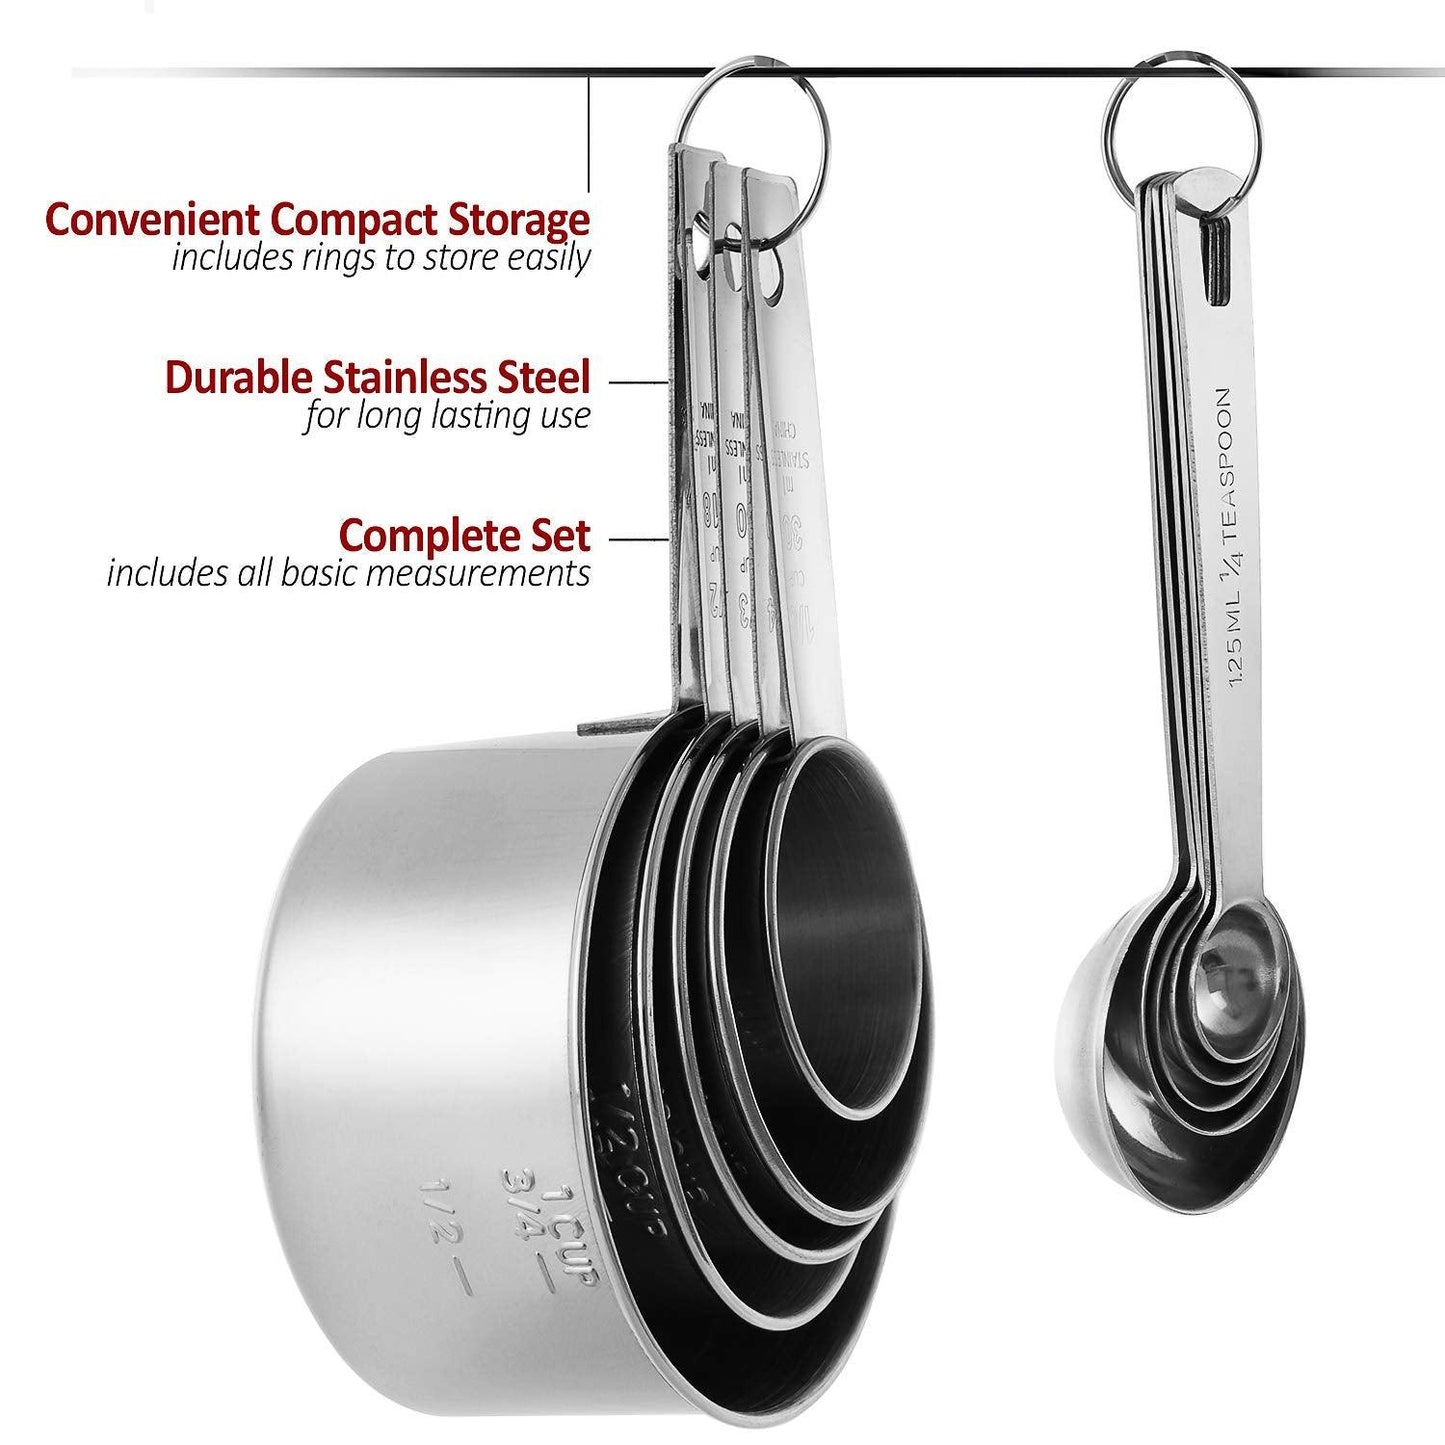 Stainless Steel Measuring Cups And Measuring Spoons 10-Piece Set, 5 Cups And 5 Spoons - CookCave